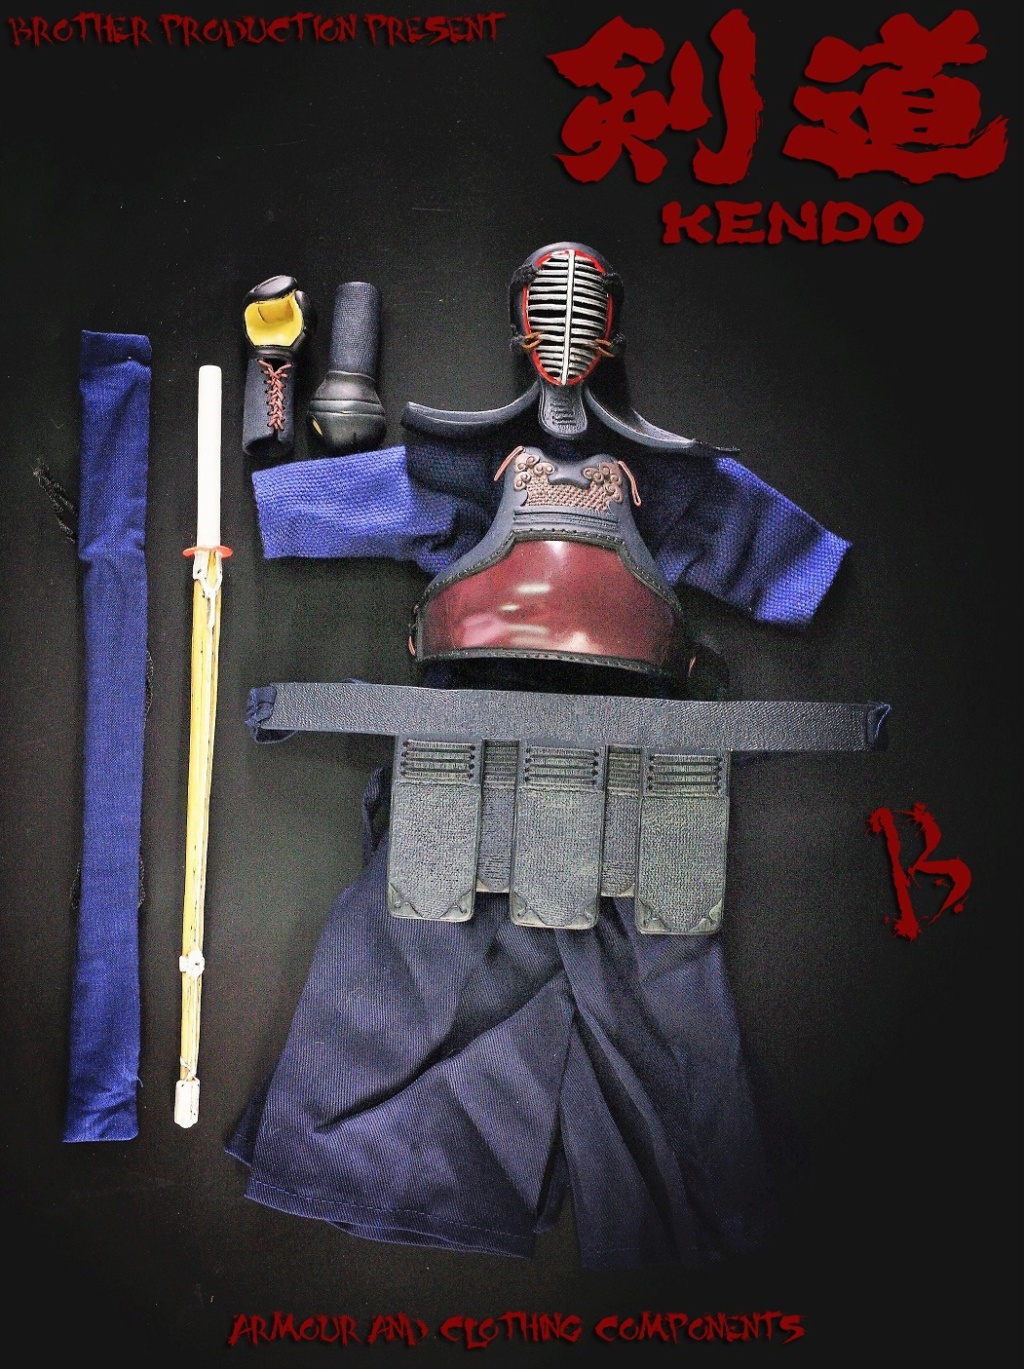 clothing - NEW PRODUCT: Brother Production: 1/6 Kendo - Armor Costume Set 15530010